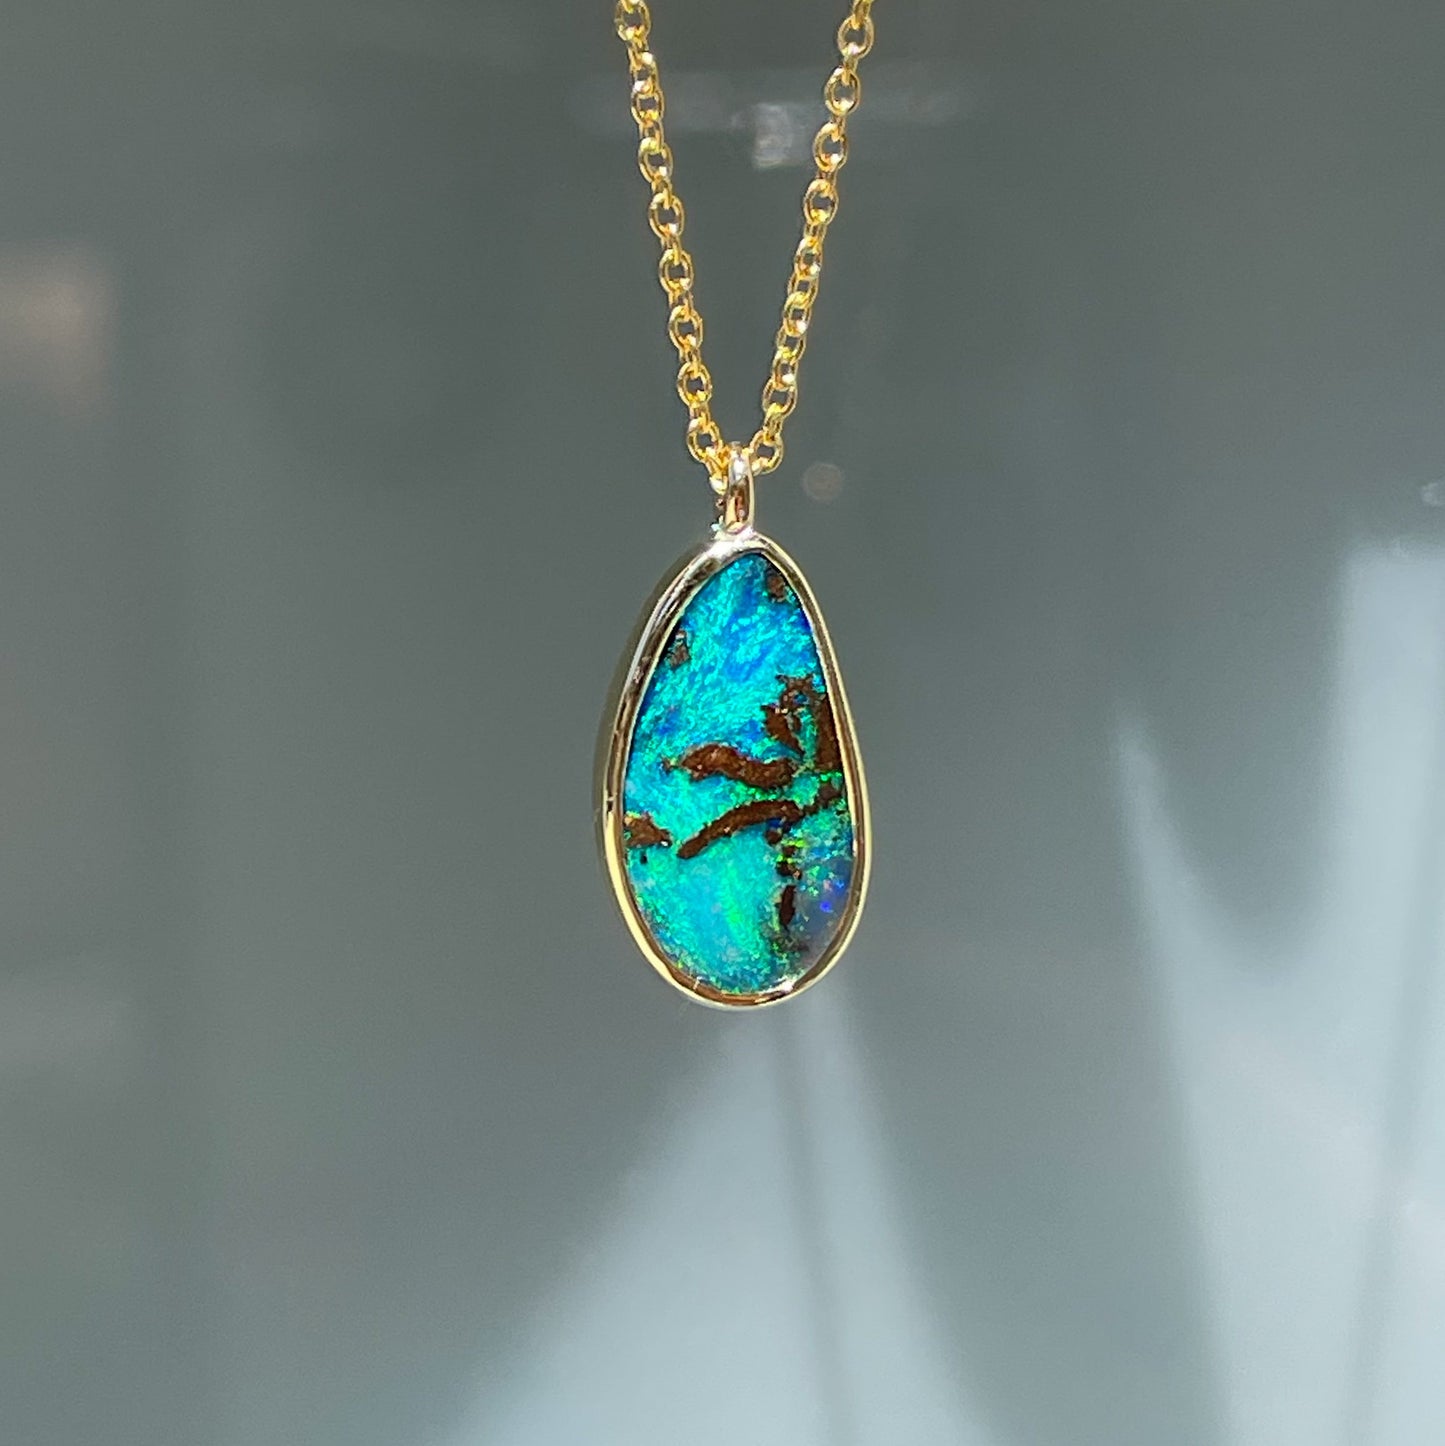 An Australian Opal Necklace by NIXIN Jewelry hanging in front of a frosted glass door. The natural opal is blue and green with inclusions that look like a palm tree. Made in 14k gold.